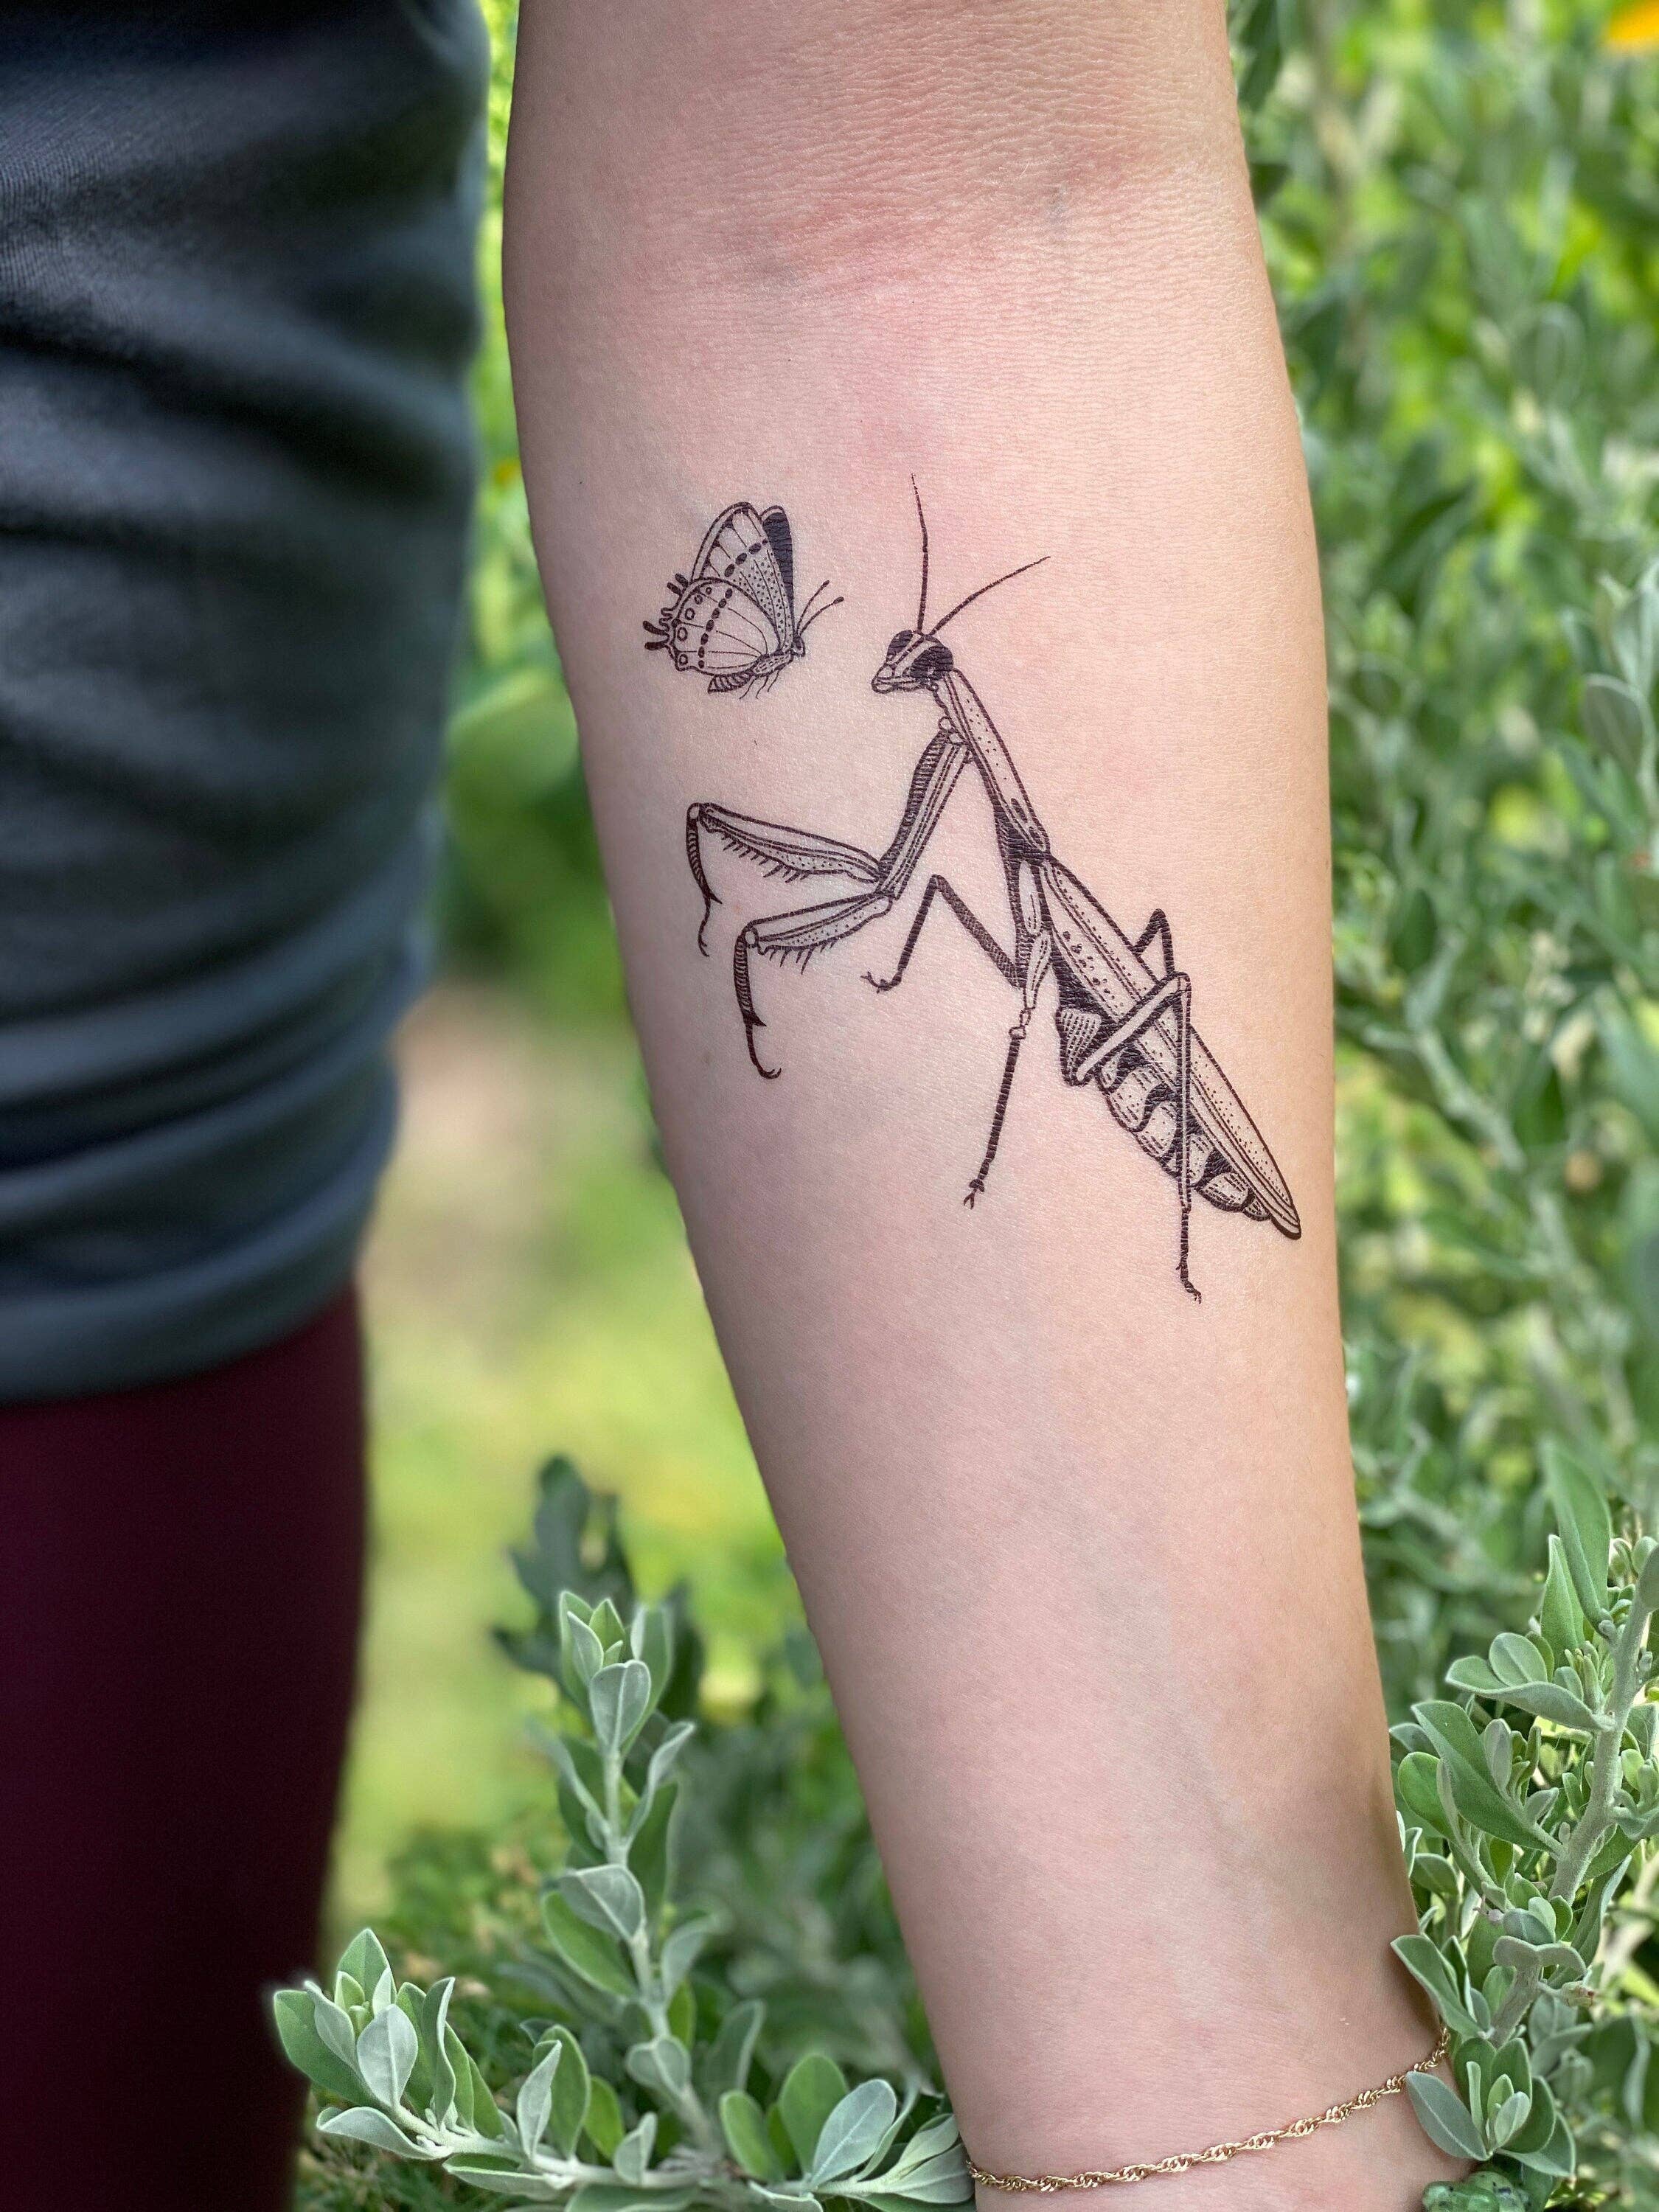 Praying mantis done by James at illusion ink in Southaven MS  rtattoo